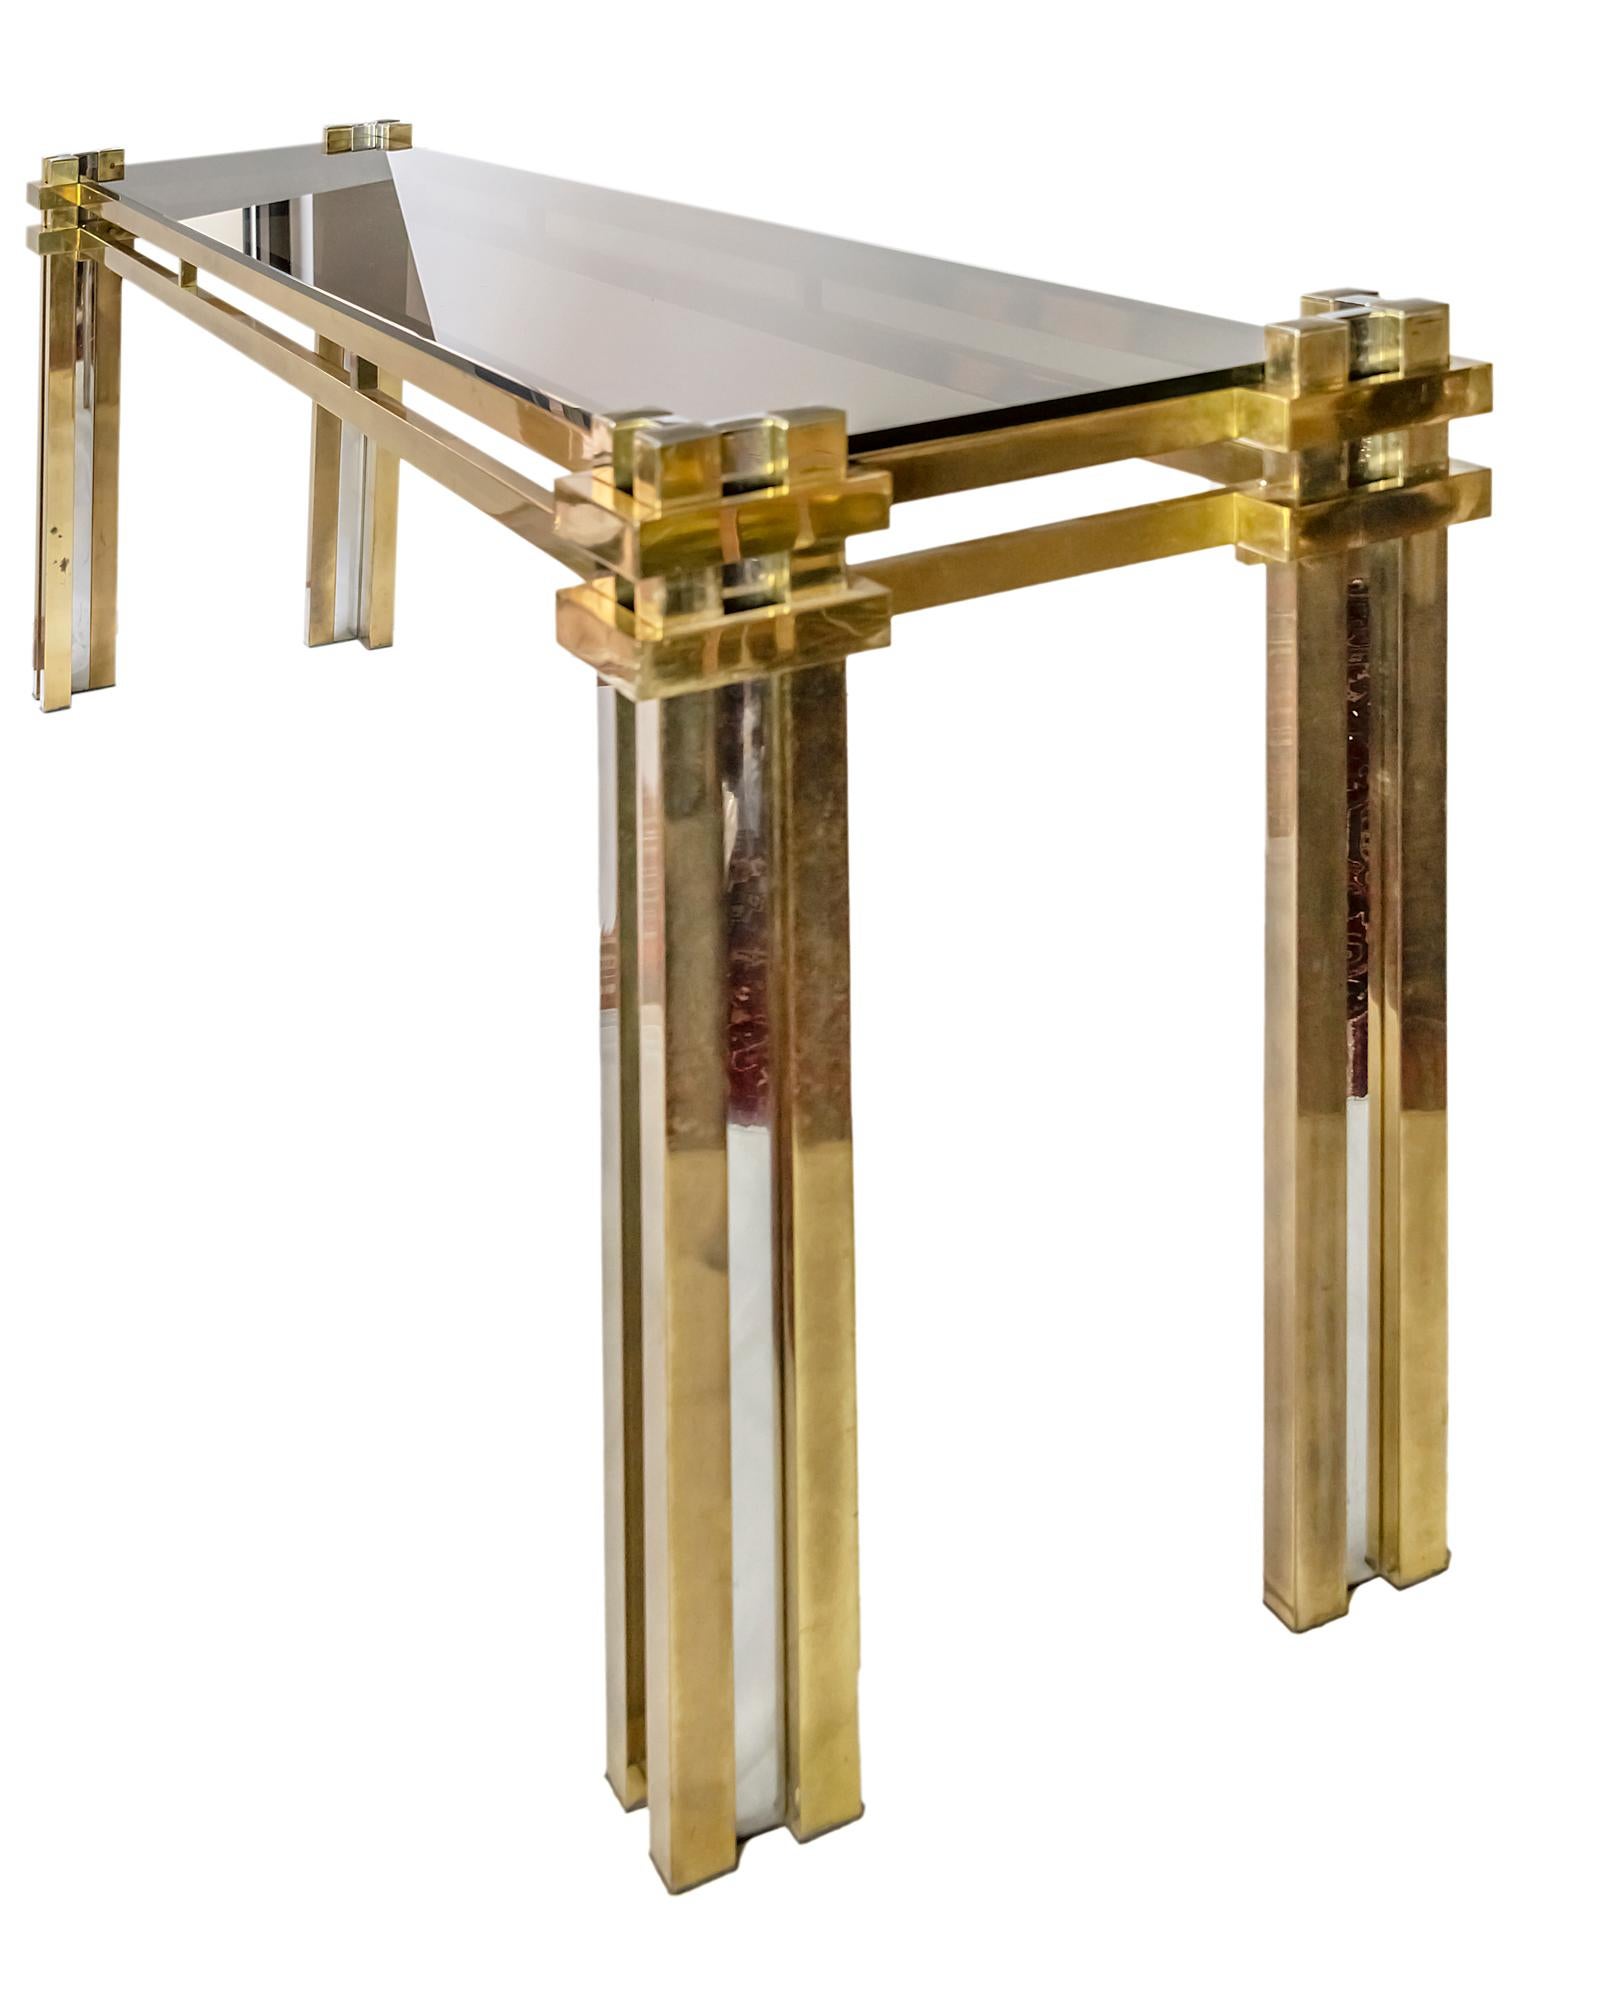 Italian console table by Romeo Rega from 1970's.
Brass and chrome base with tinted grey glass top.
It is heavy and solid.